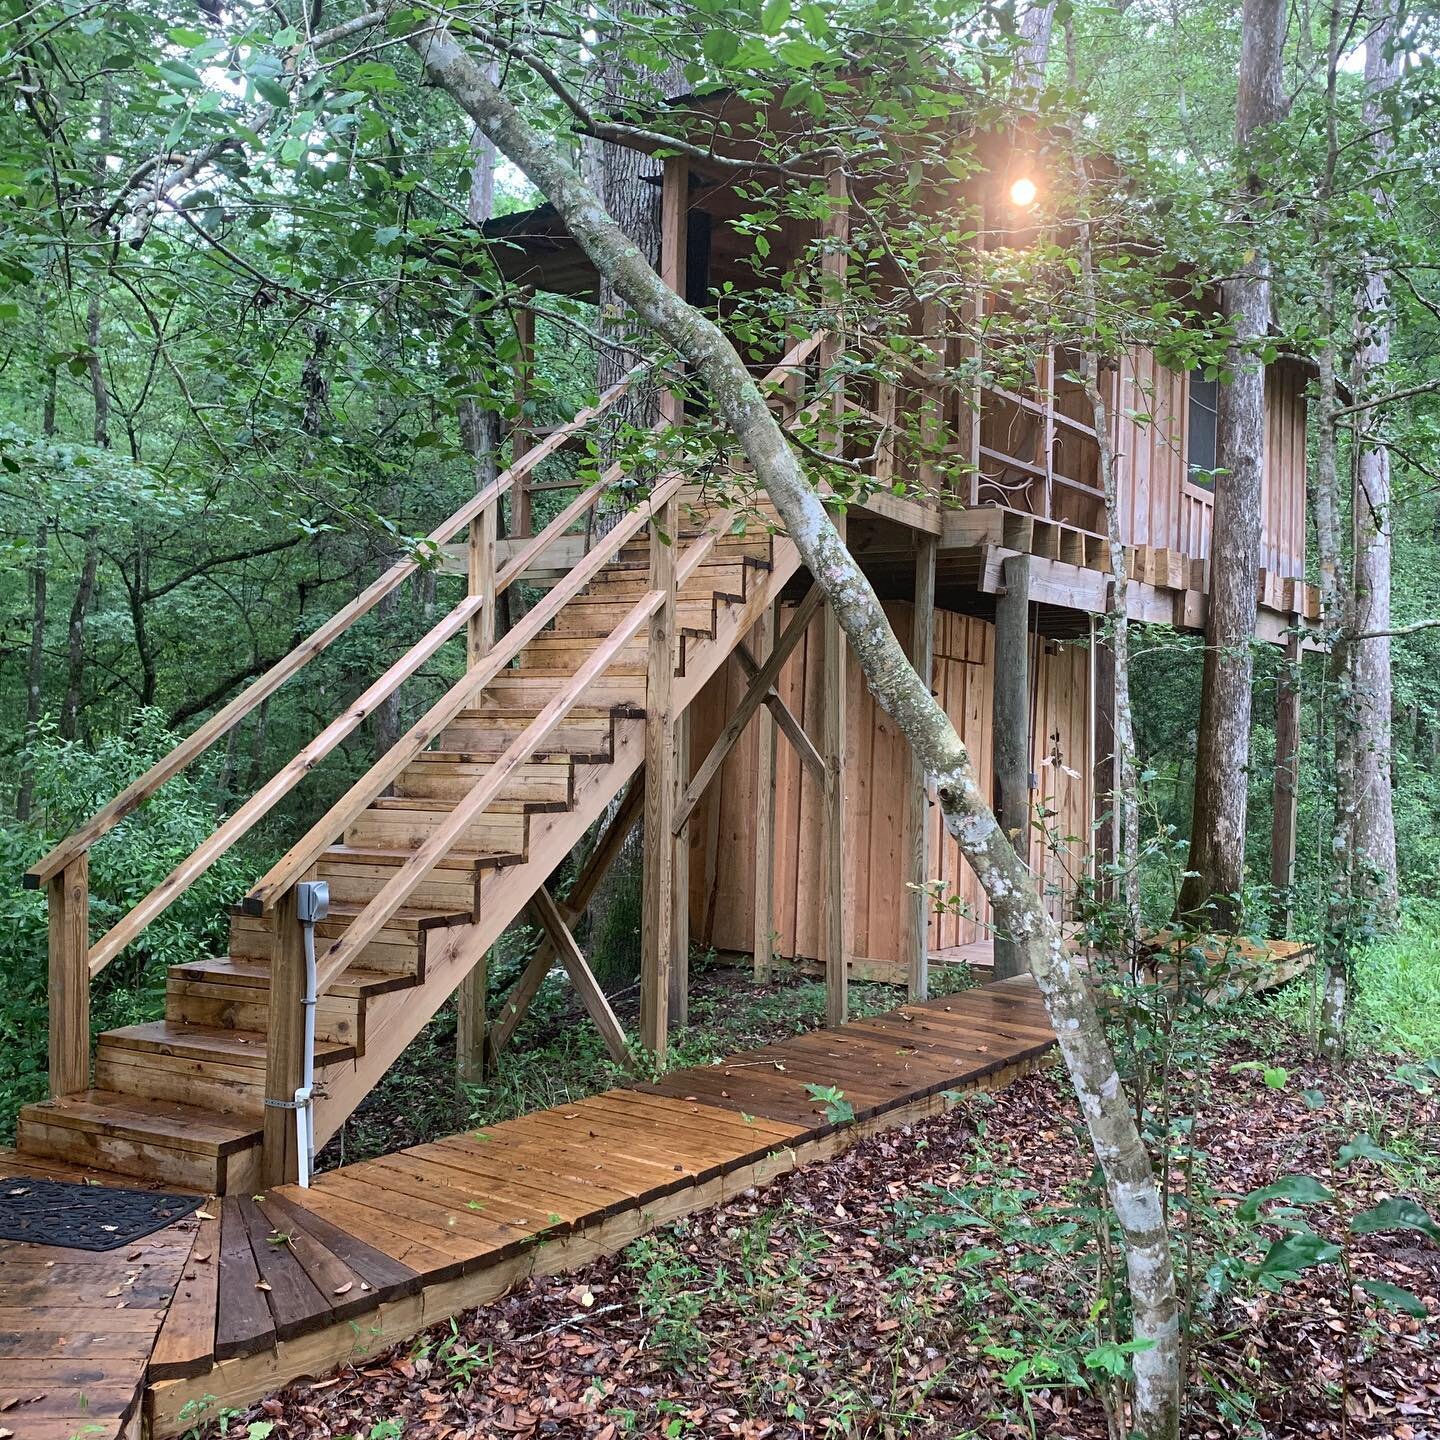 One of two treehouses on the property! We call this the New Treehouse. There are four beds, a bathroom and an enclosed shower. Short walk to The Lodge. 🦉